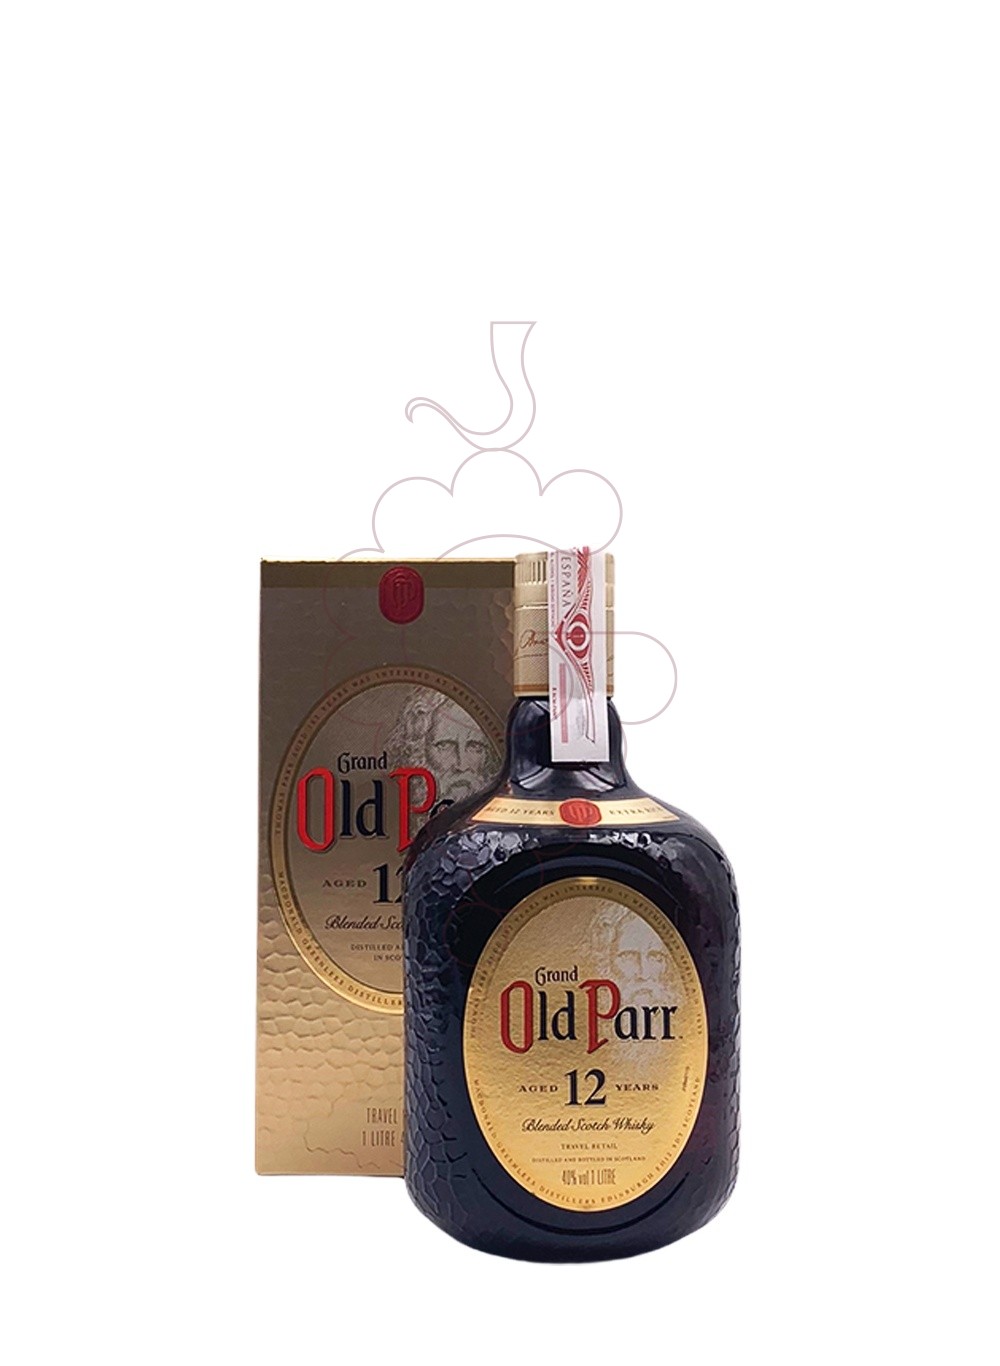 Foto Whisky Old Parr 12 Anys